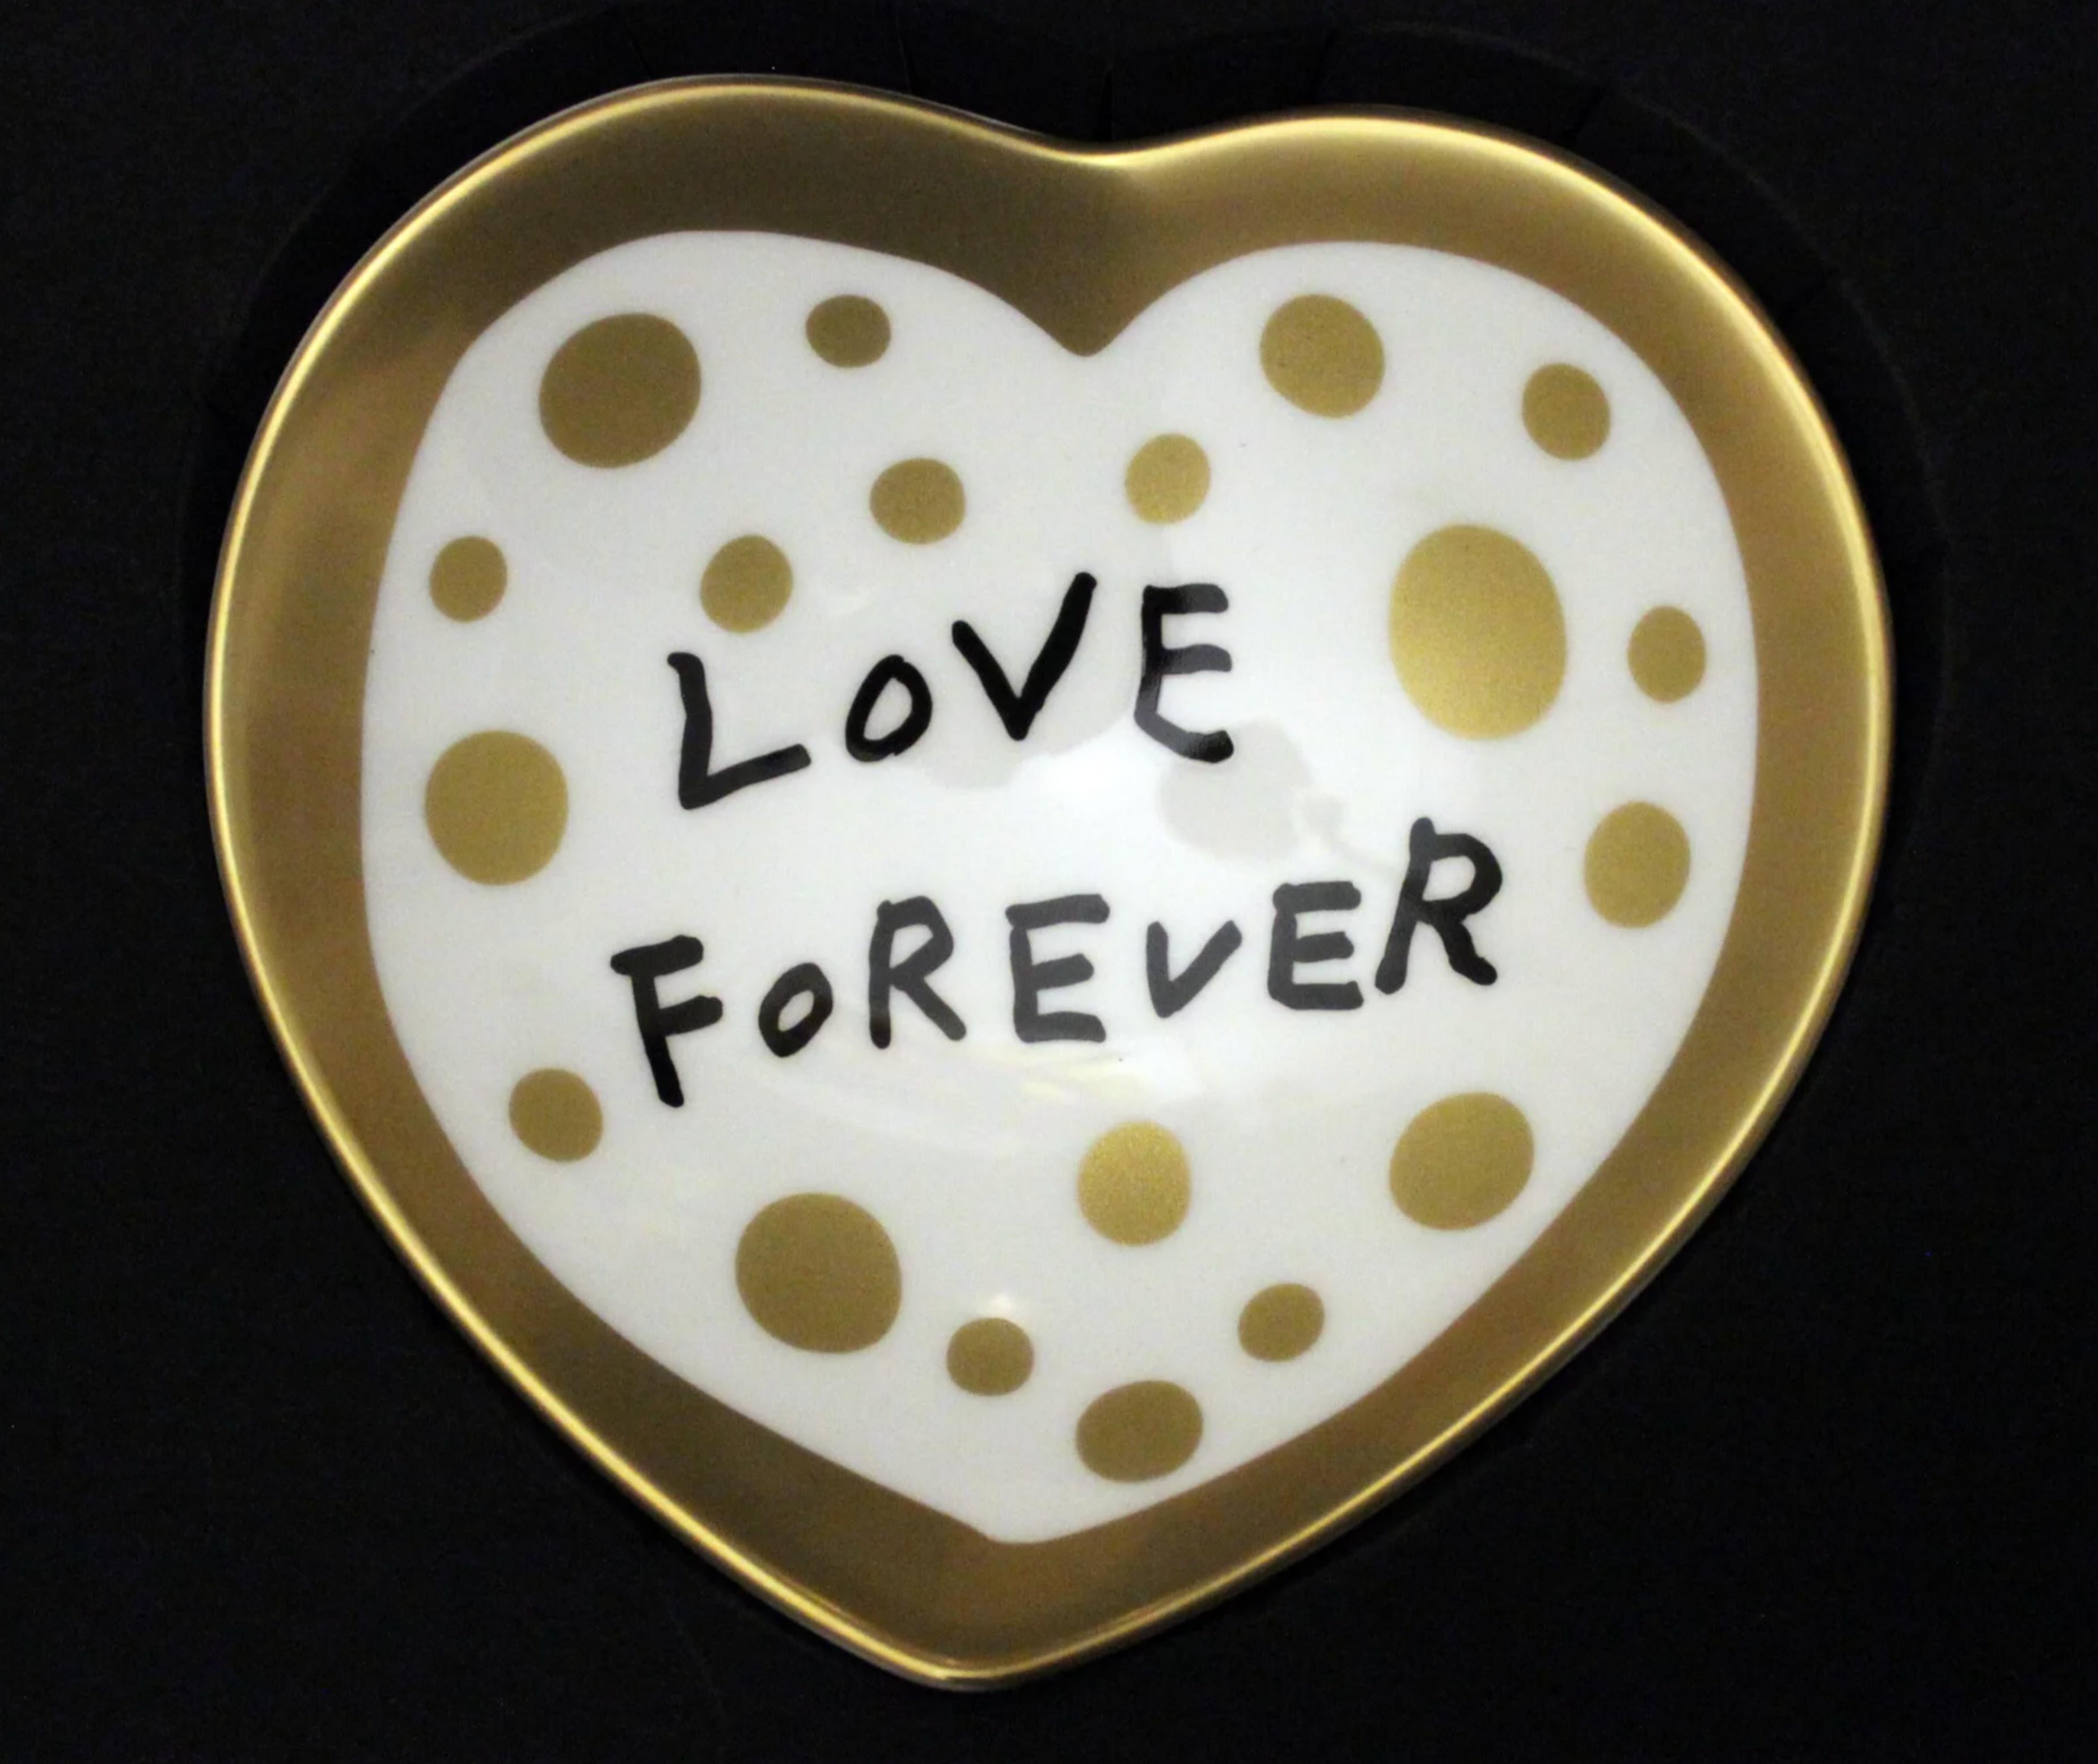 Love Forever Porcelain Bowl VIP Gold Edition Limited Edition for Ginza 6 opening - Art by Yayoi Kusama